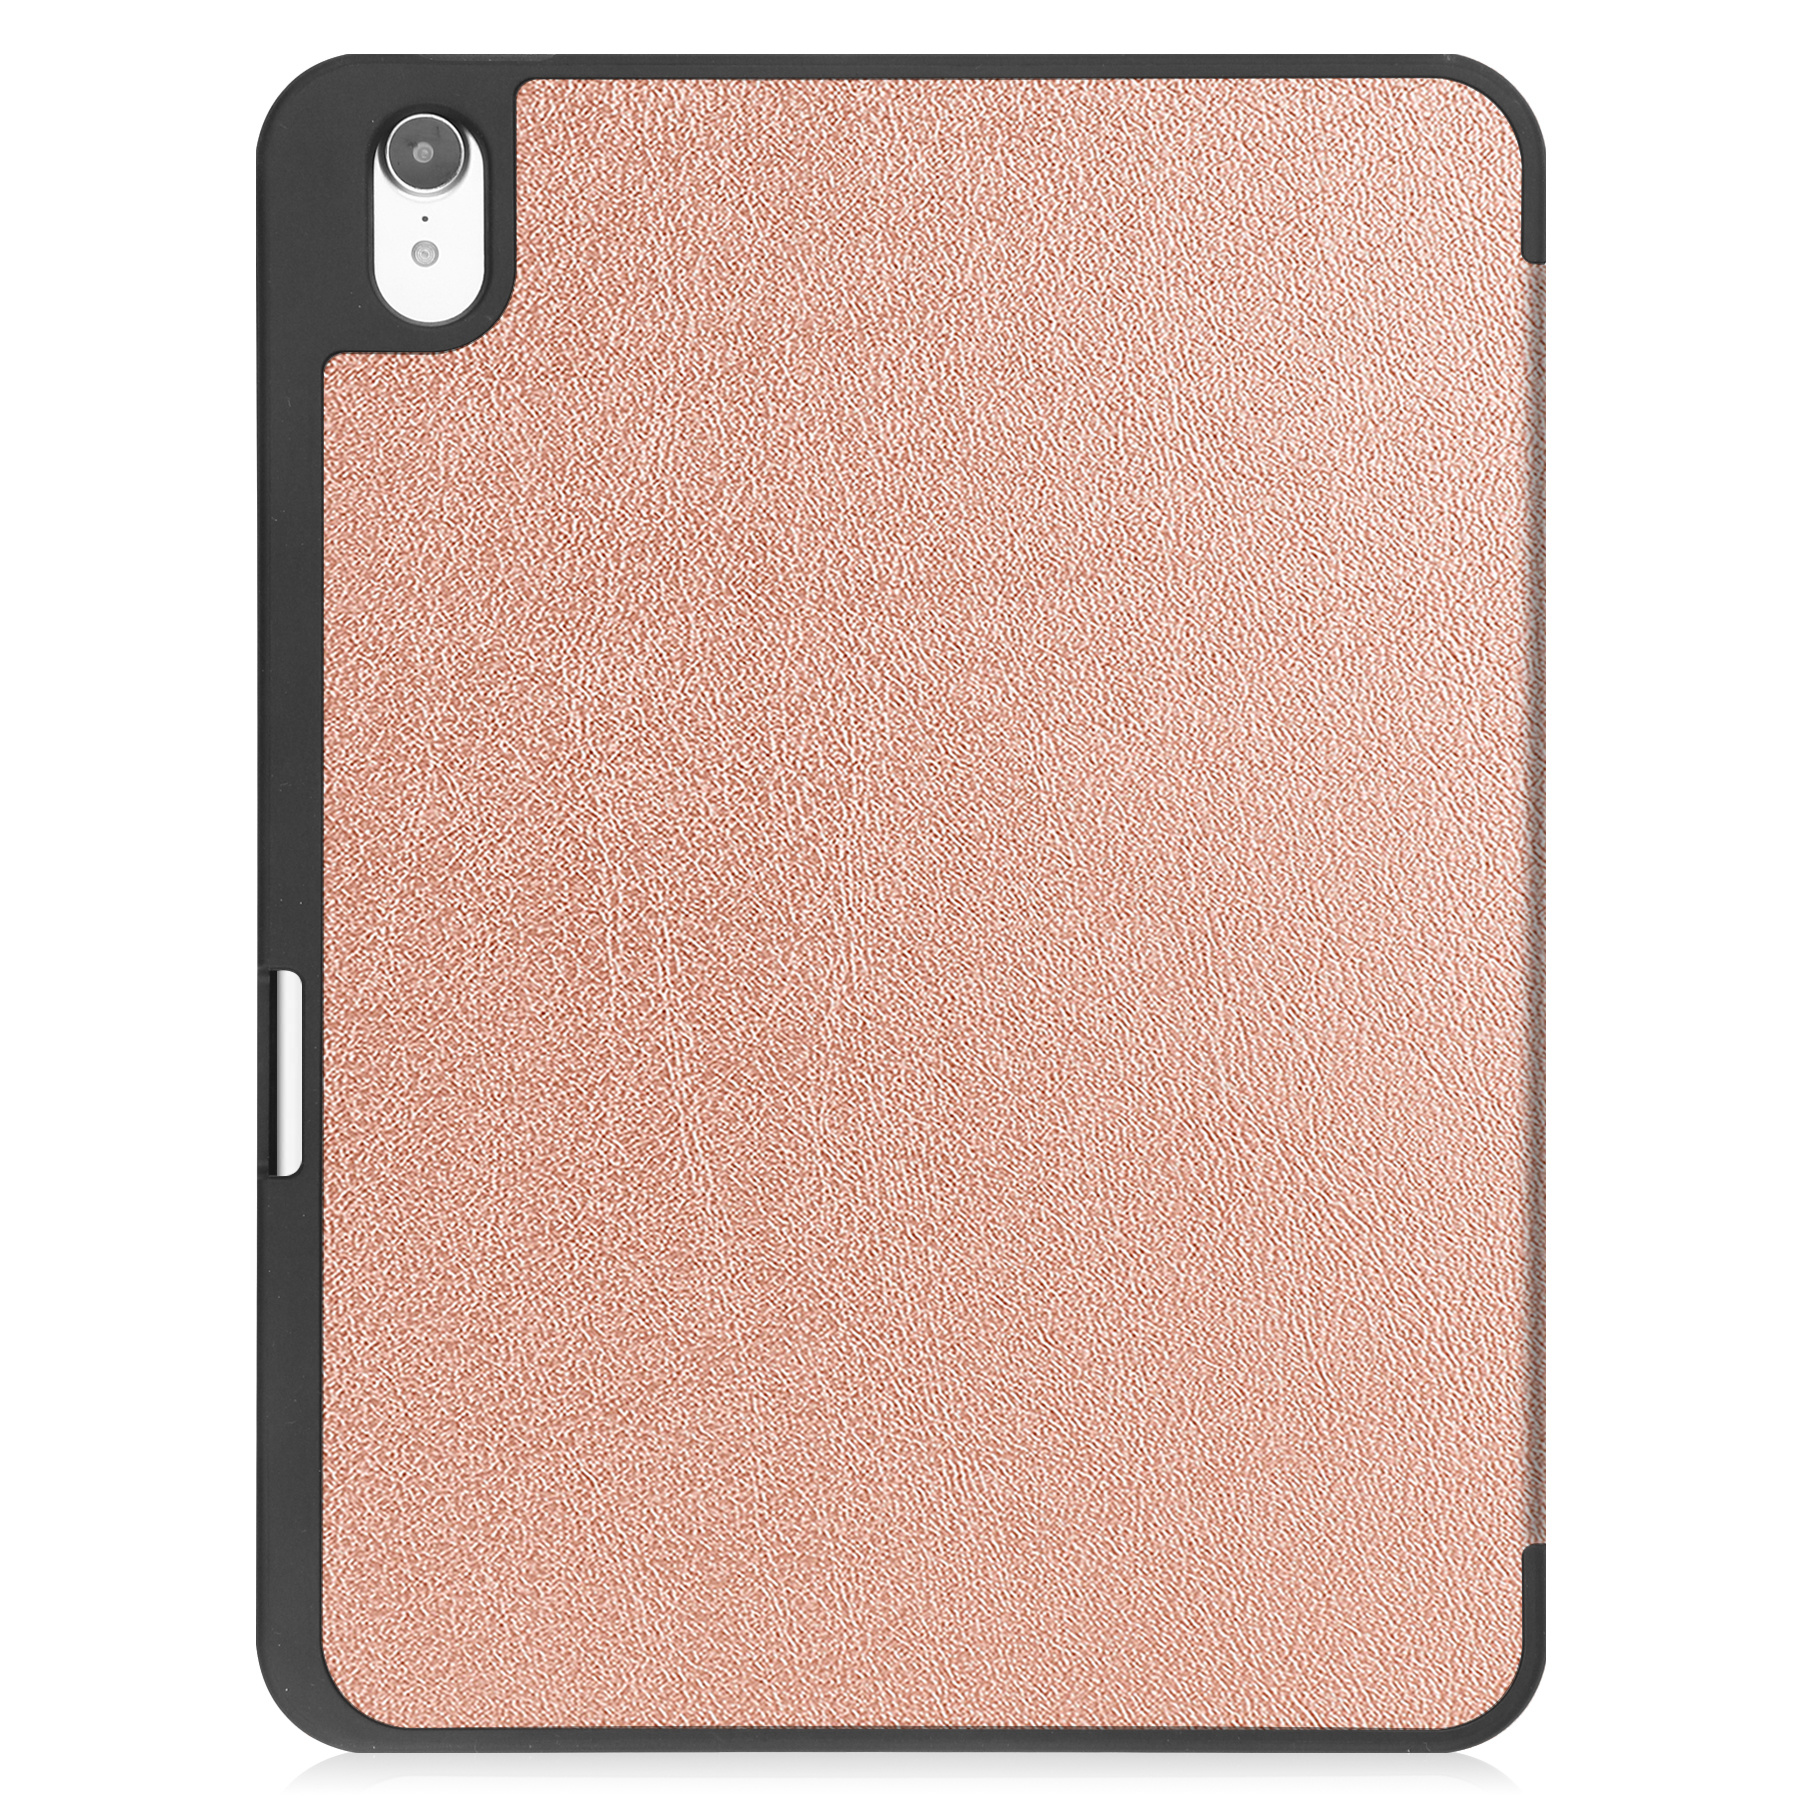 iPad 2022 Hoesje Book Case Hard Cover Hoes Met Uitsparing Apple Pencil - iPad 10 Hoes Hardcover - Rood